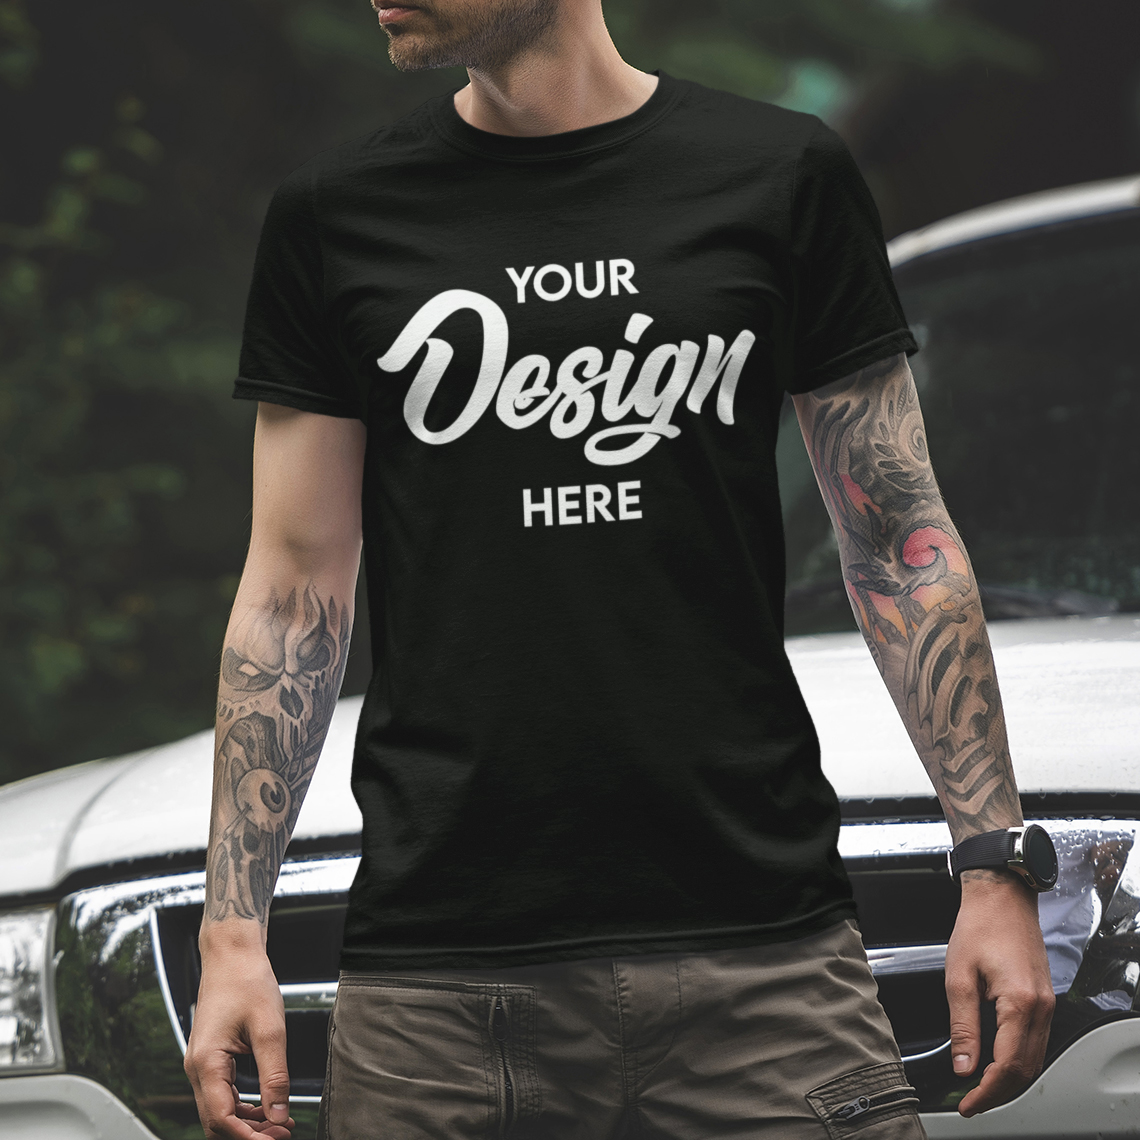 Design Your Own Shirt